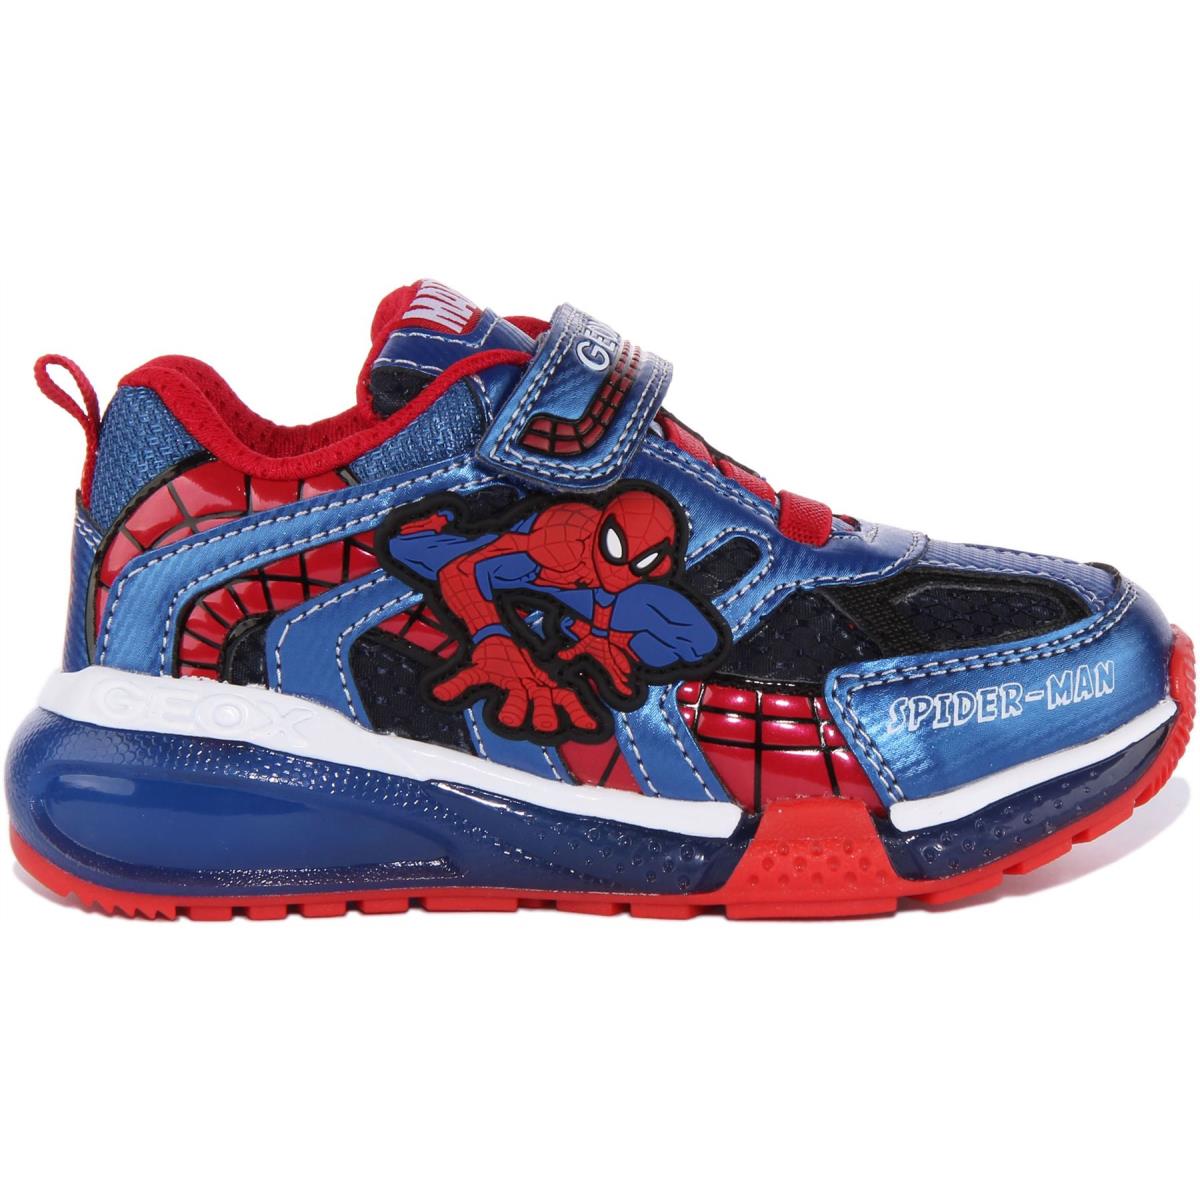 Geox J Bayonce Boys Single Strap Spiderman Sneaker In Navy Red Size US 8 - 4